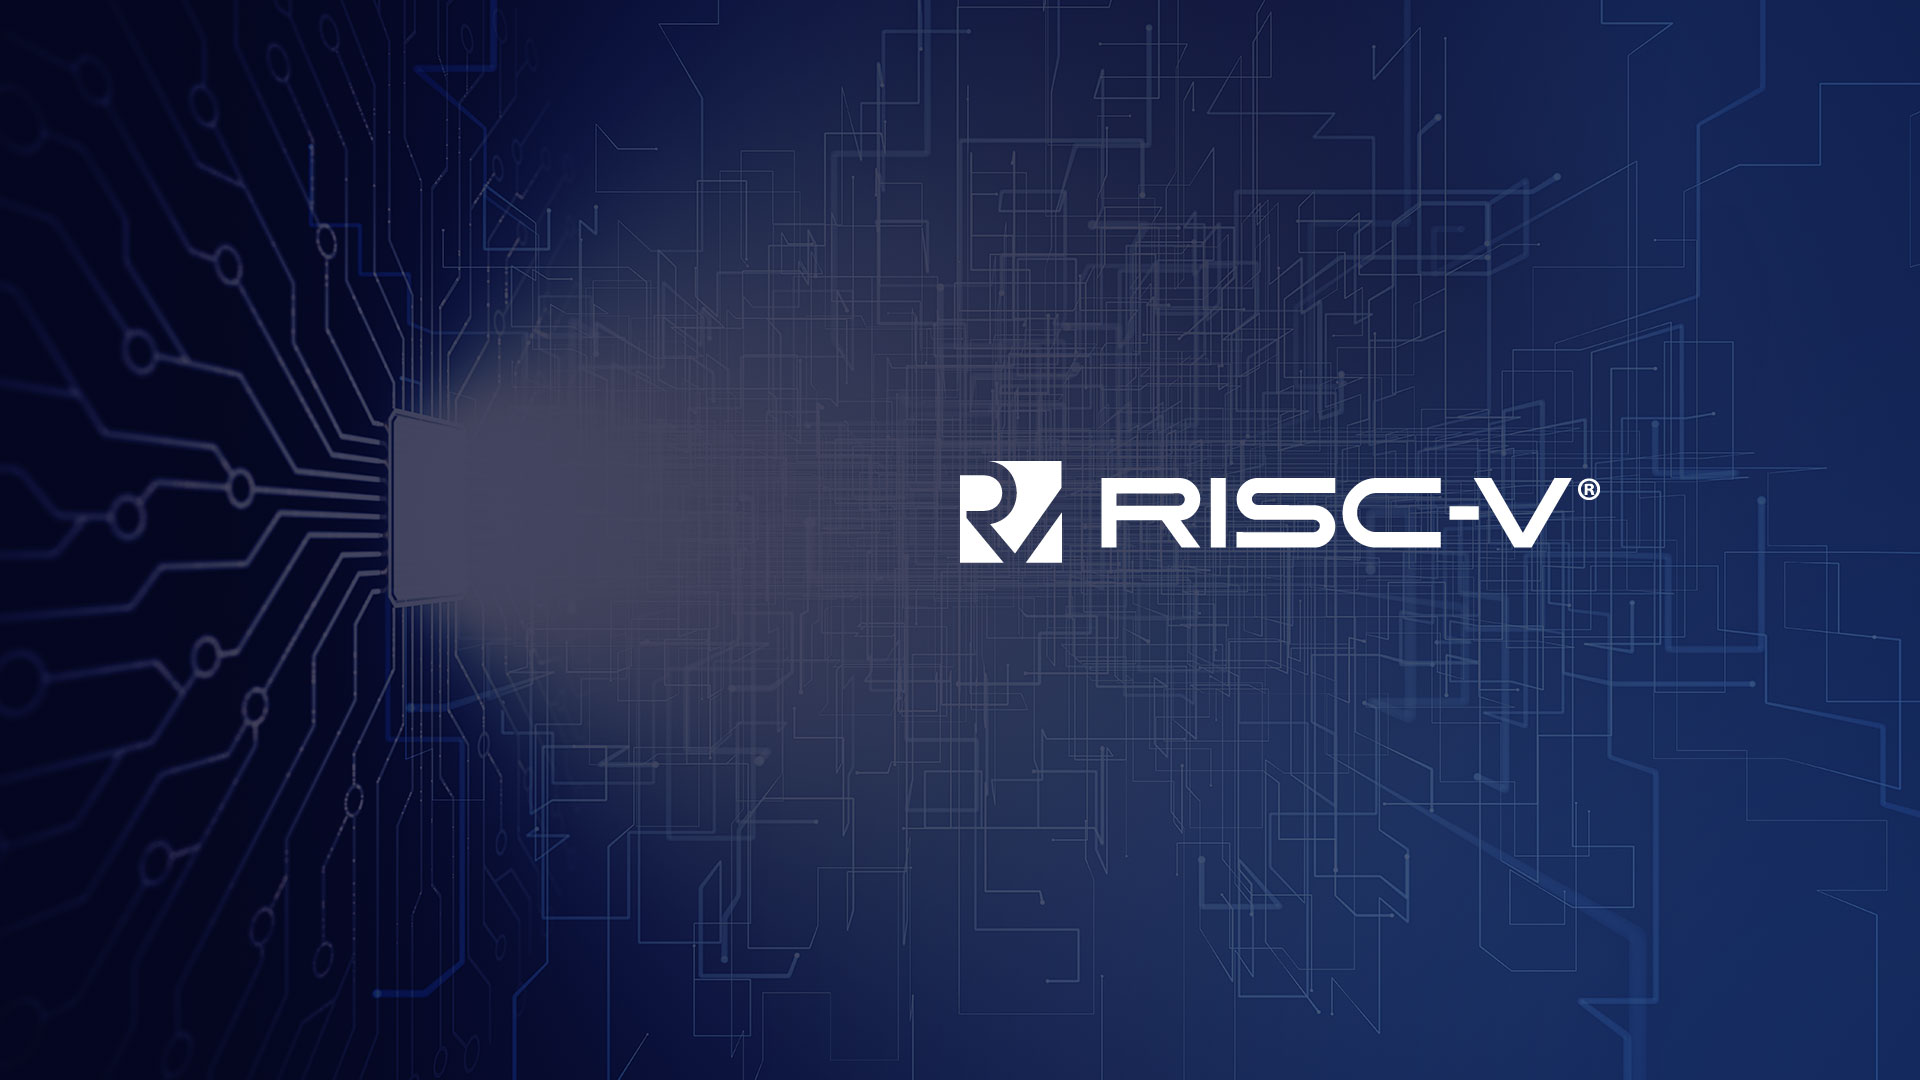 risc-v logo and open source processors